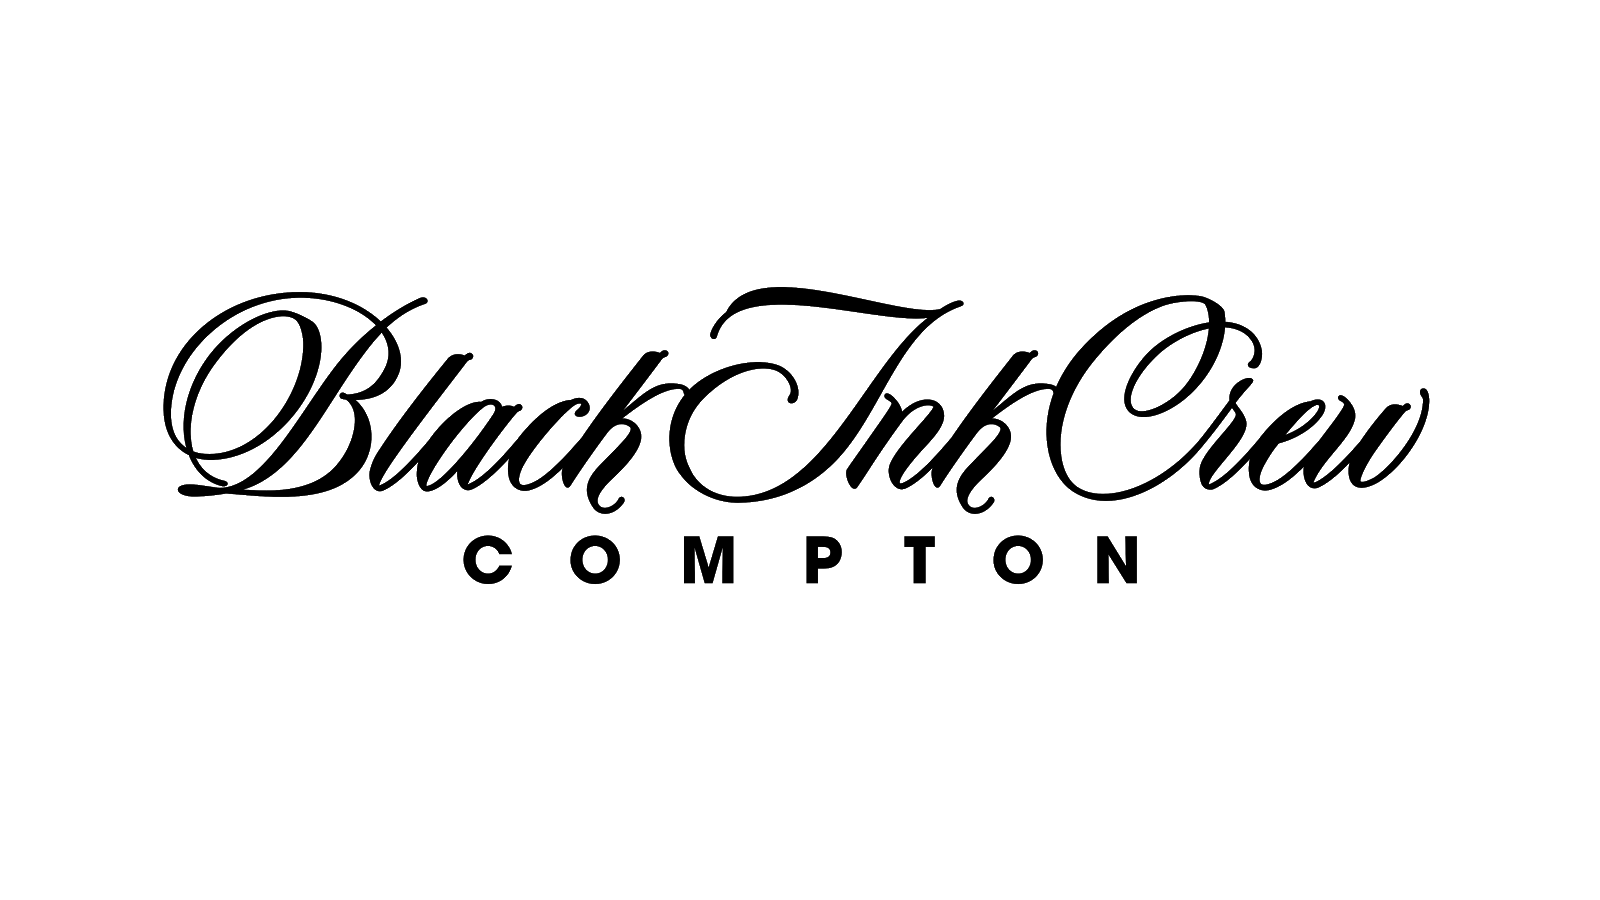 Black Ink Crew” expands franchise west with “Black Ink Crew